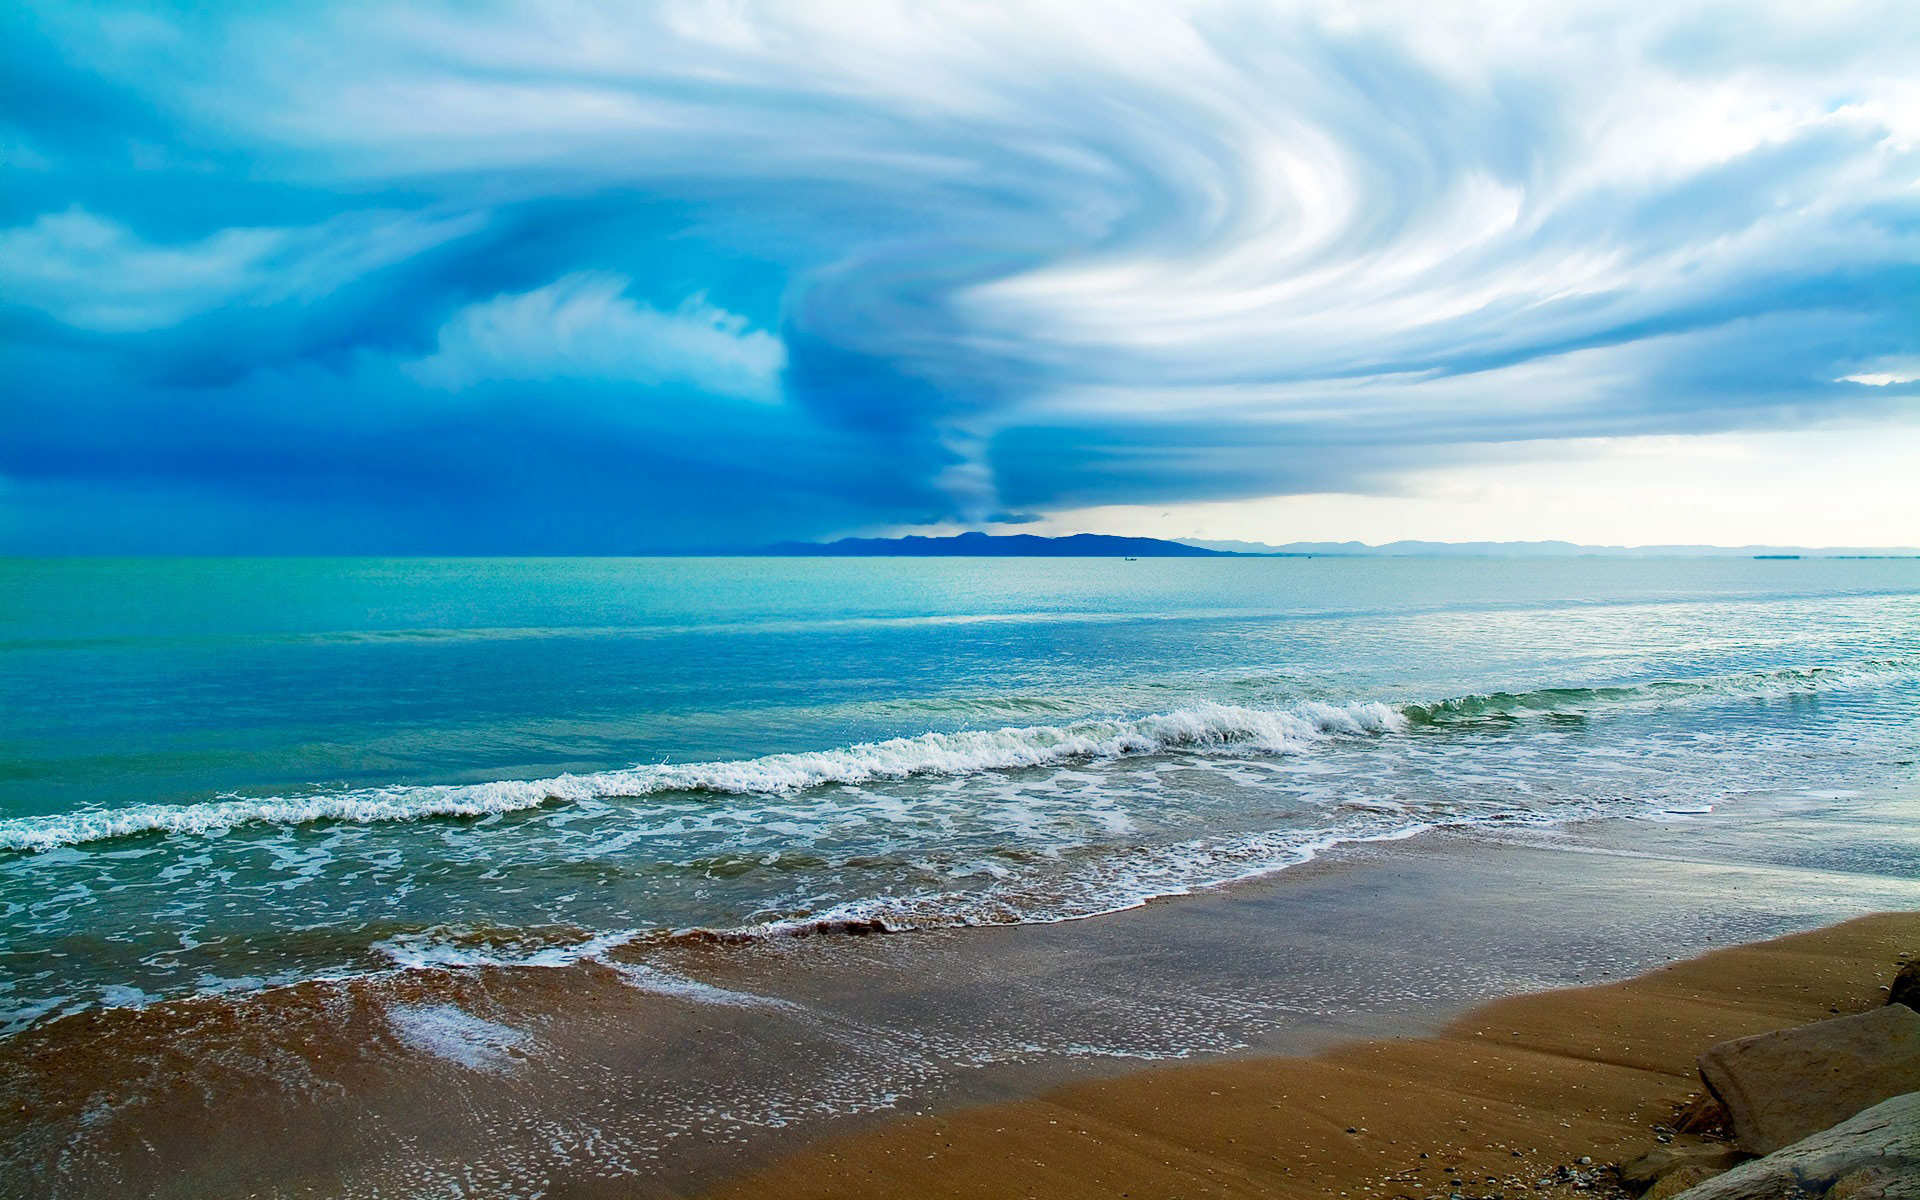 Seascape: Wonders of weather can be seen from the sandy coast of a tropical archipelago in the ocean. 1920x1200 HD Background.